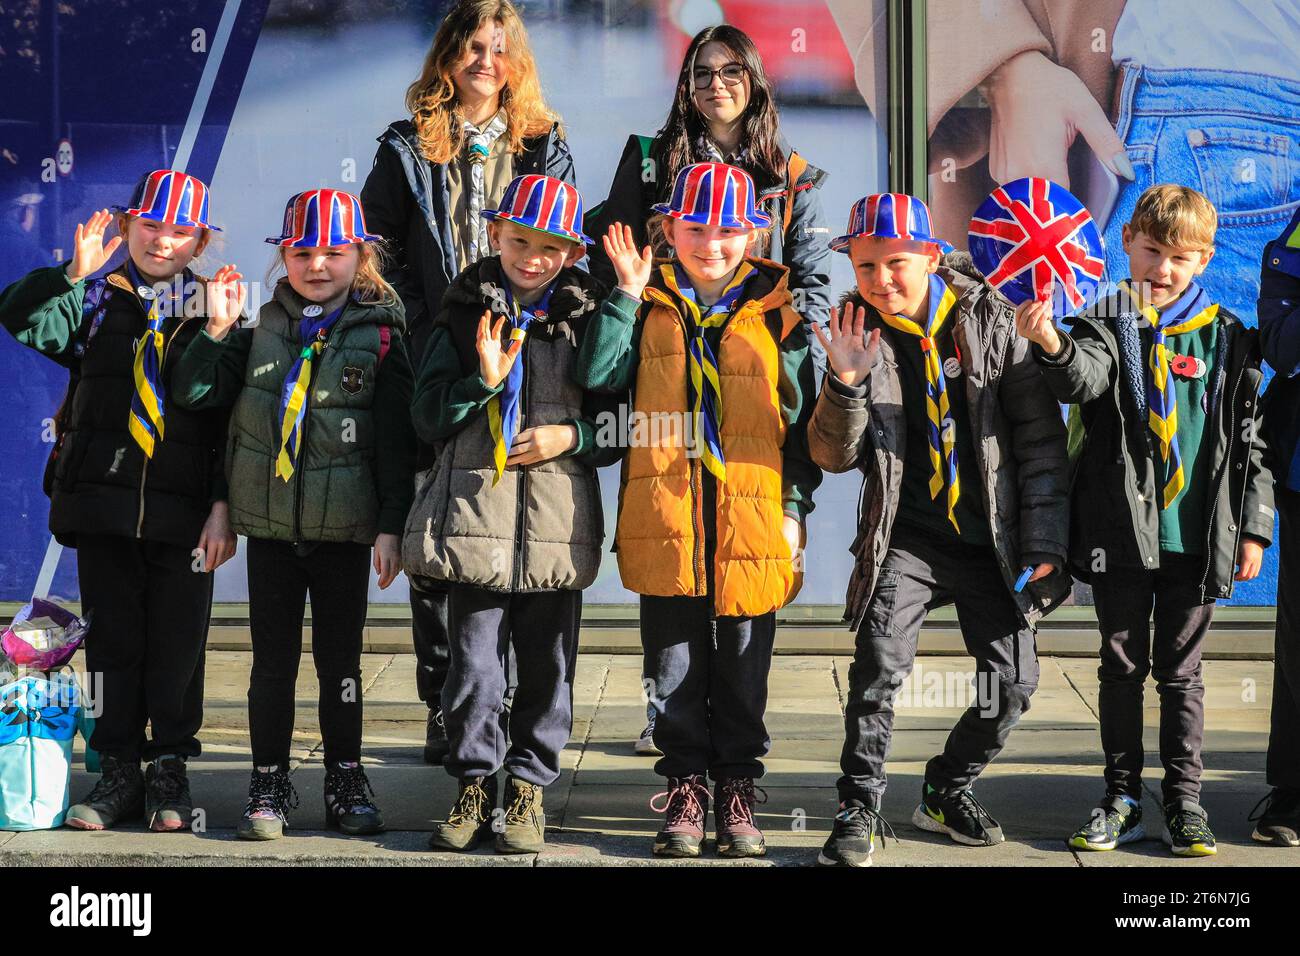 London, UK 11th Nov 2023. The 1st Coulsdon Scout Group cheer on the parade. This year's Lord Mayor's Show brings together 7,000 people, including charities, community groups, the armed forces, 250 horses, and over 150 floats in a three-mile-long parade, including the golden State Coach with new Lord Mayor Michael Mainelli. Stock Photo